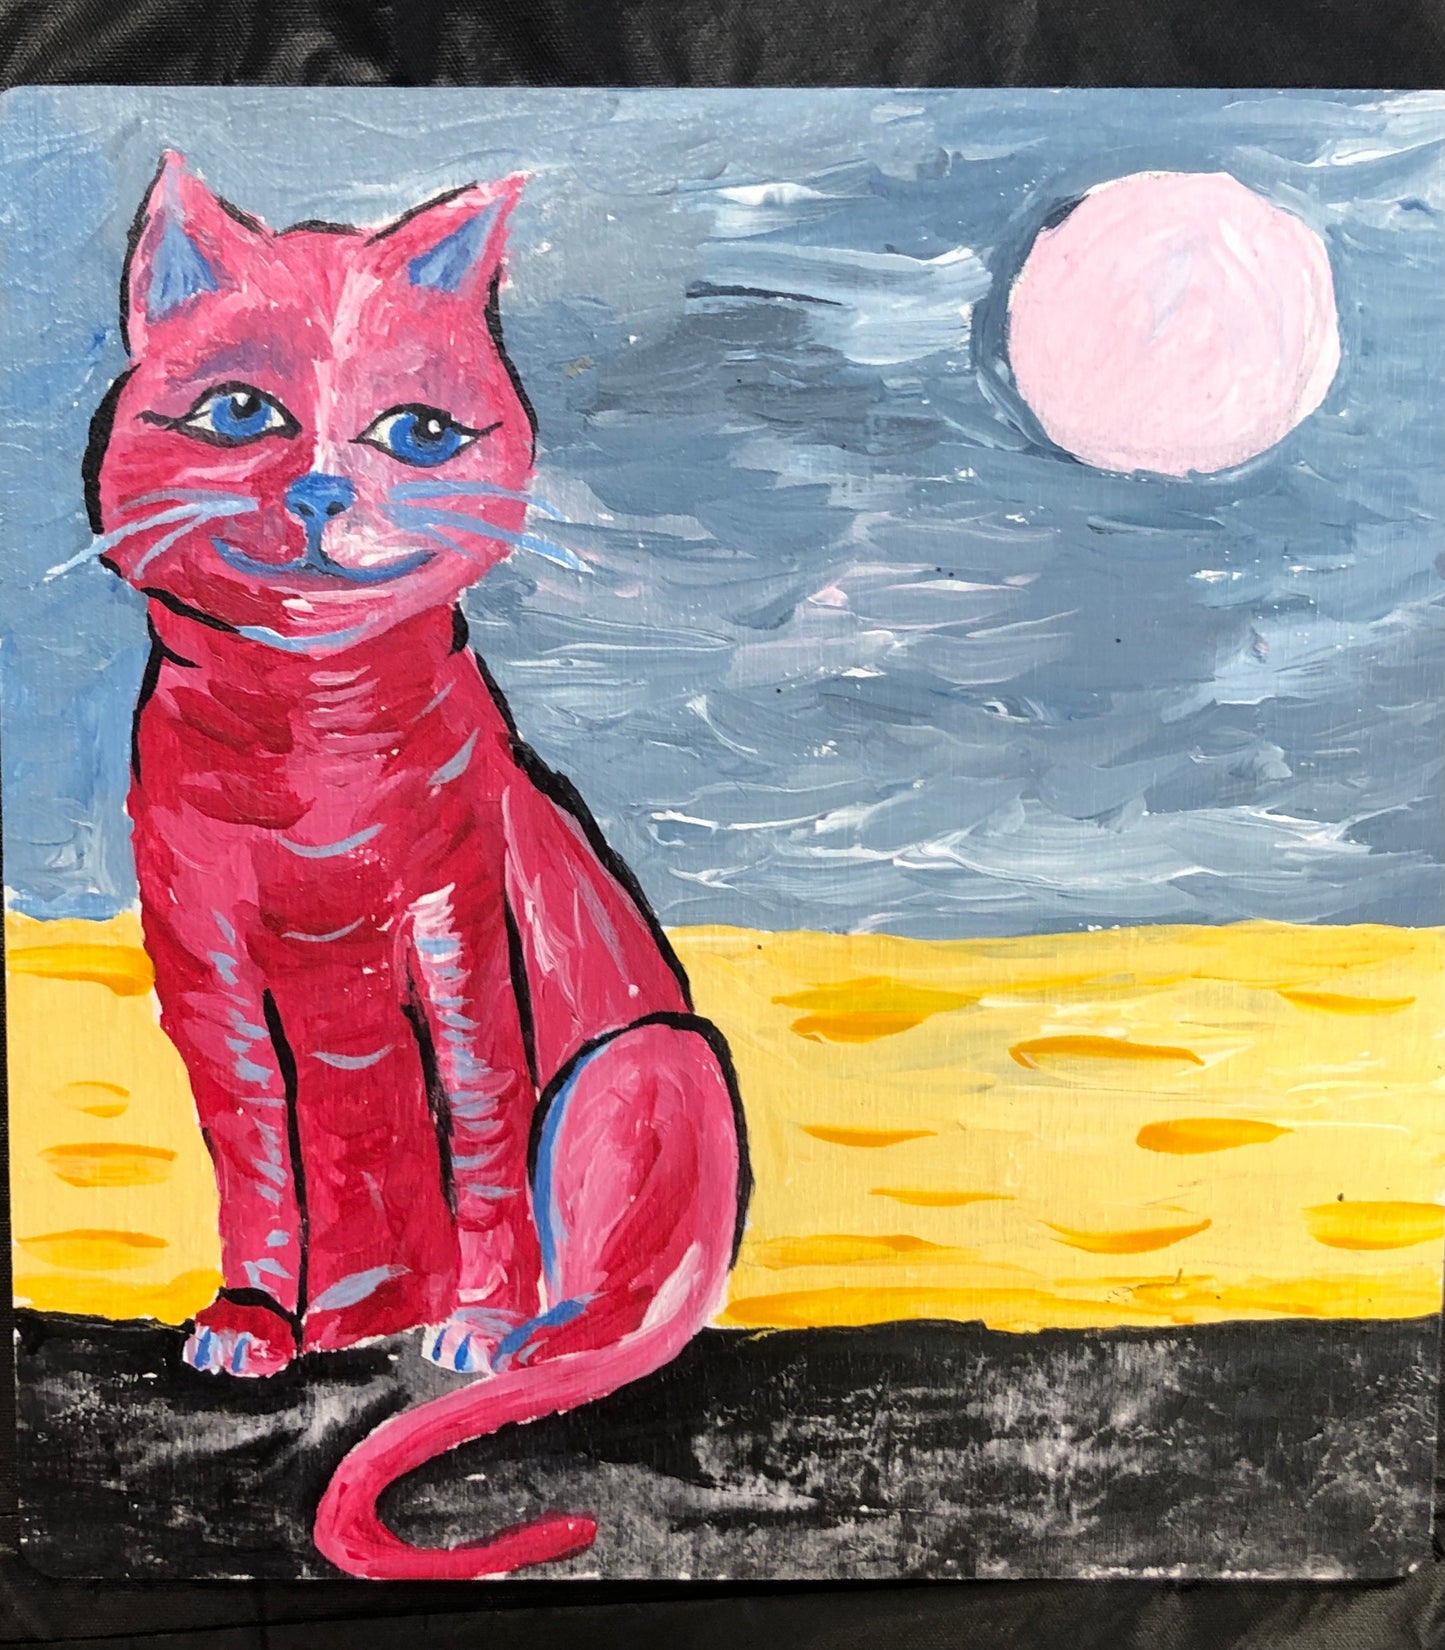 Thu, Feb 16th 430-7P, "A Love of Pets" Private Wine & Paint Valentine's Class